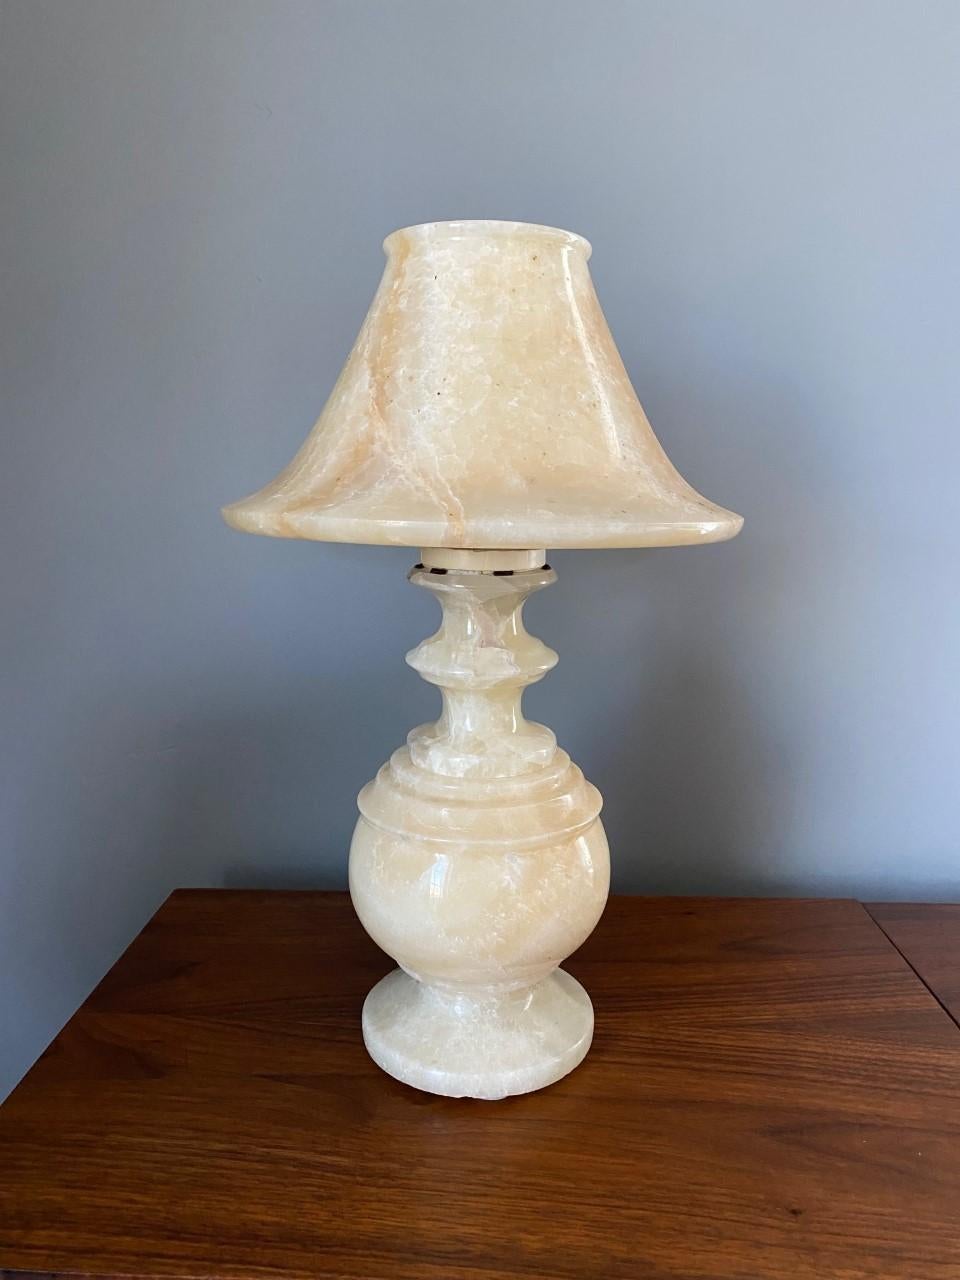 Beautifully carved alabaster marble lamp that is striking and beautiful. This lamp is composed of a marble body and a marble shade and together stand not only as a lamp, but as a sculpture. The classic shapes against the translucent alabaster give